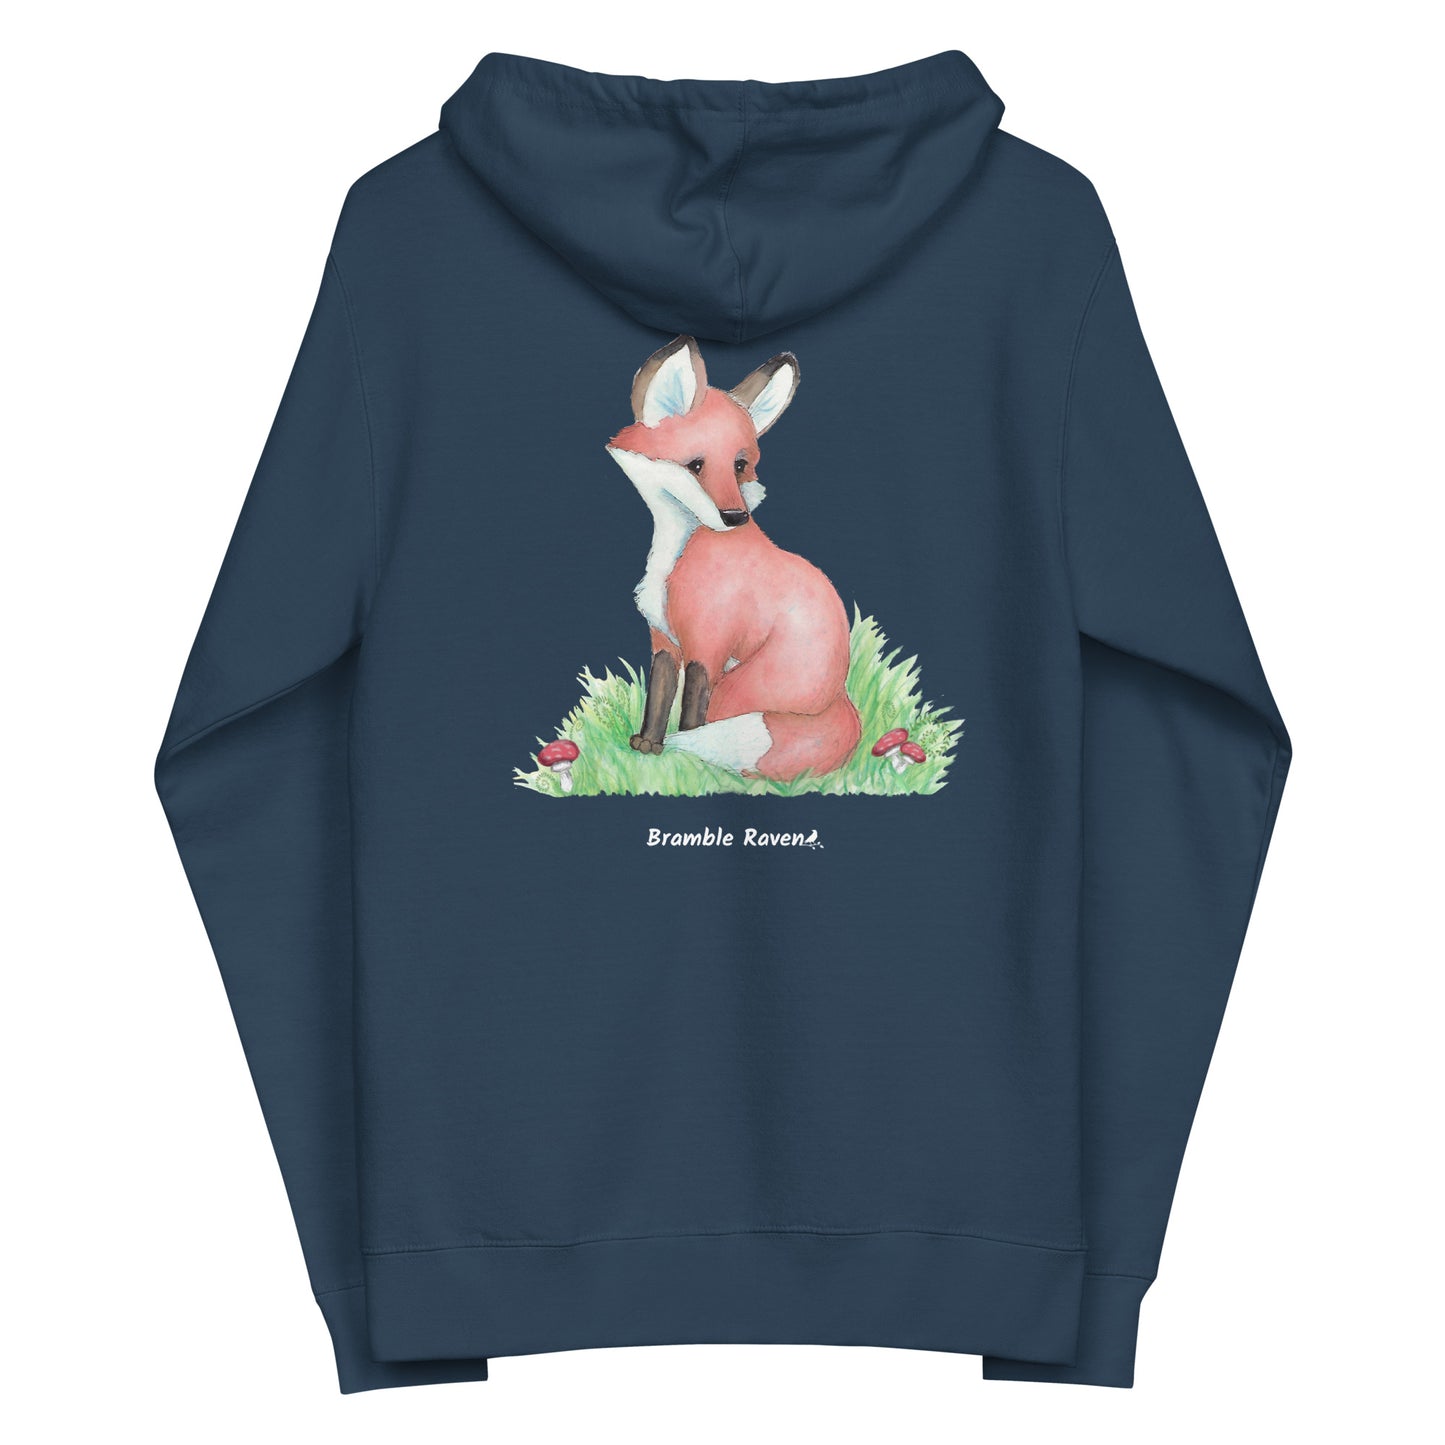 Navy blue unisex fleece zip up hoodie. Back design features a watercolor fox in the grass with ferns and mushrooms. Has a jersey-lined hood, metal eyelets and zipper.